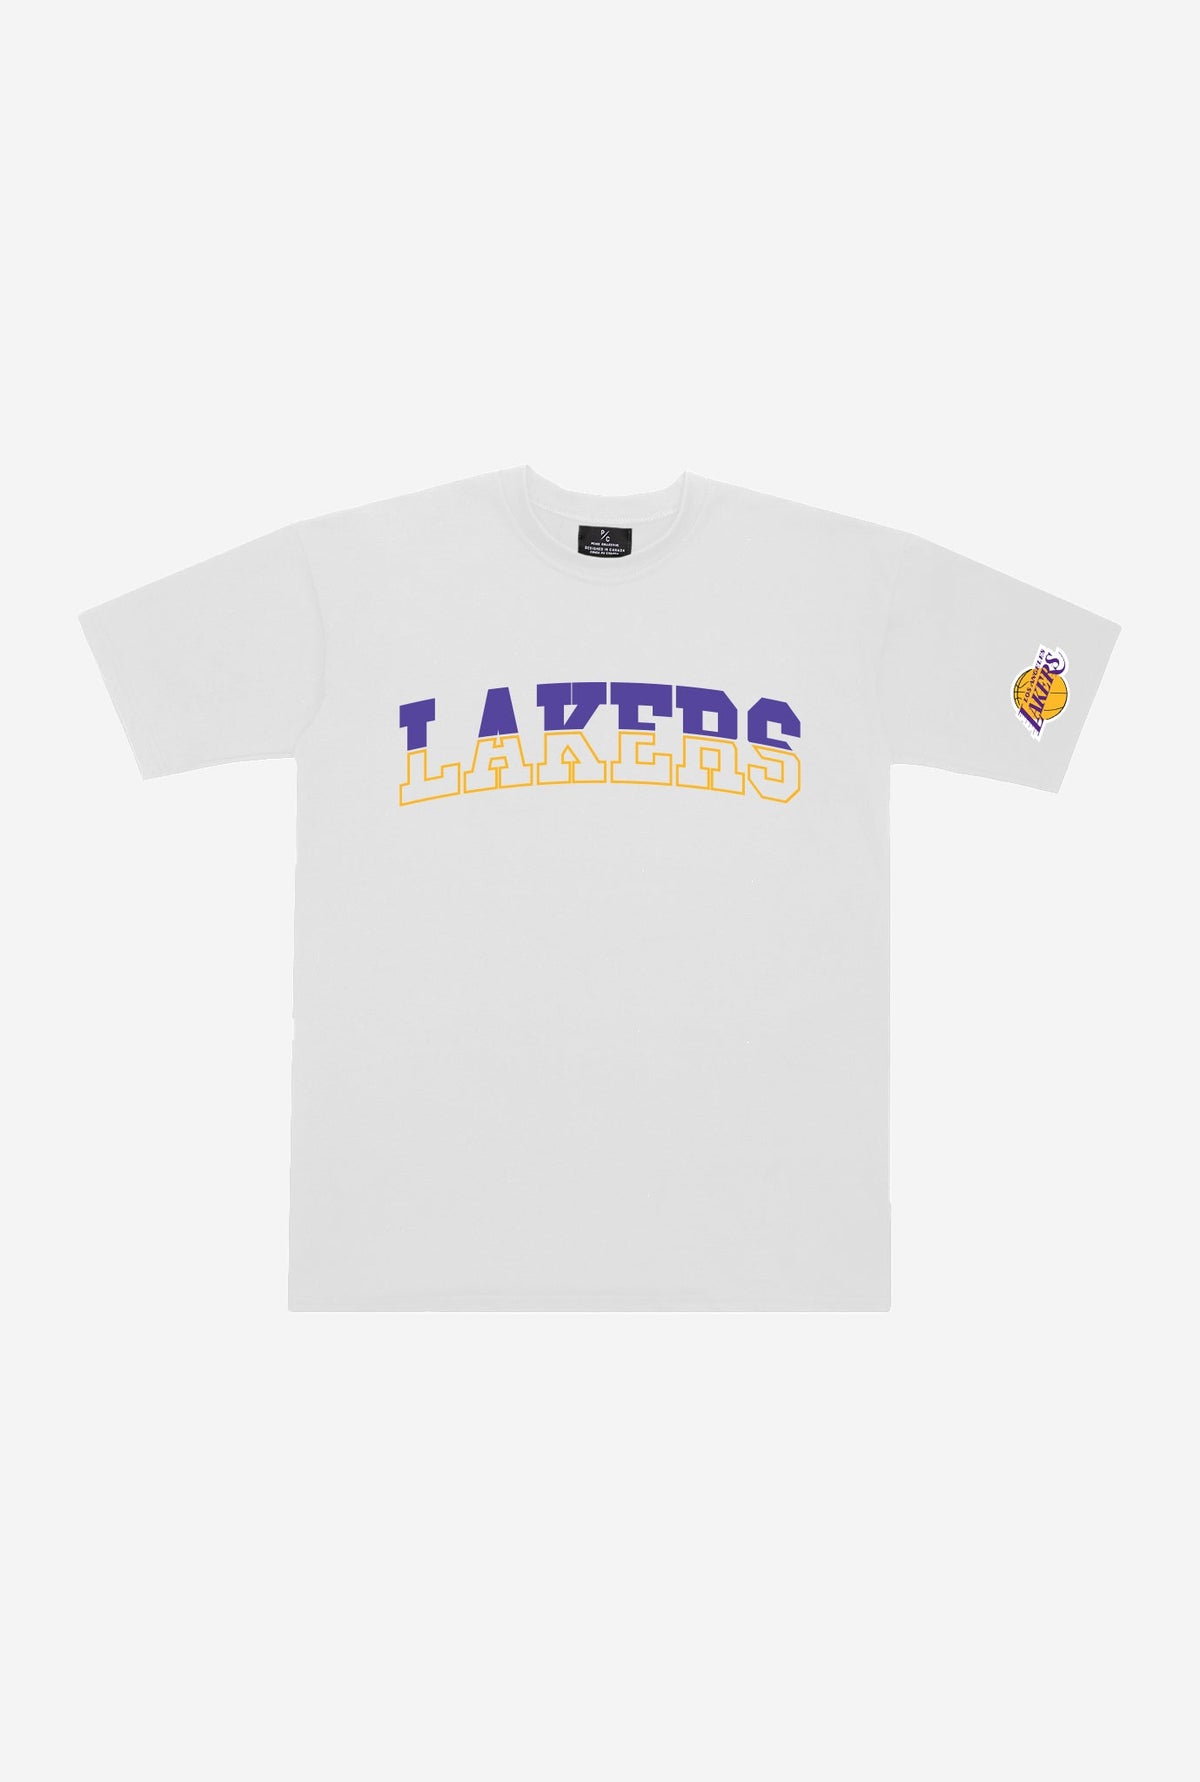 Los Angeles Lakers Collegiate Heavyweight T-Shirt - White